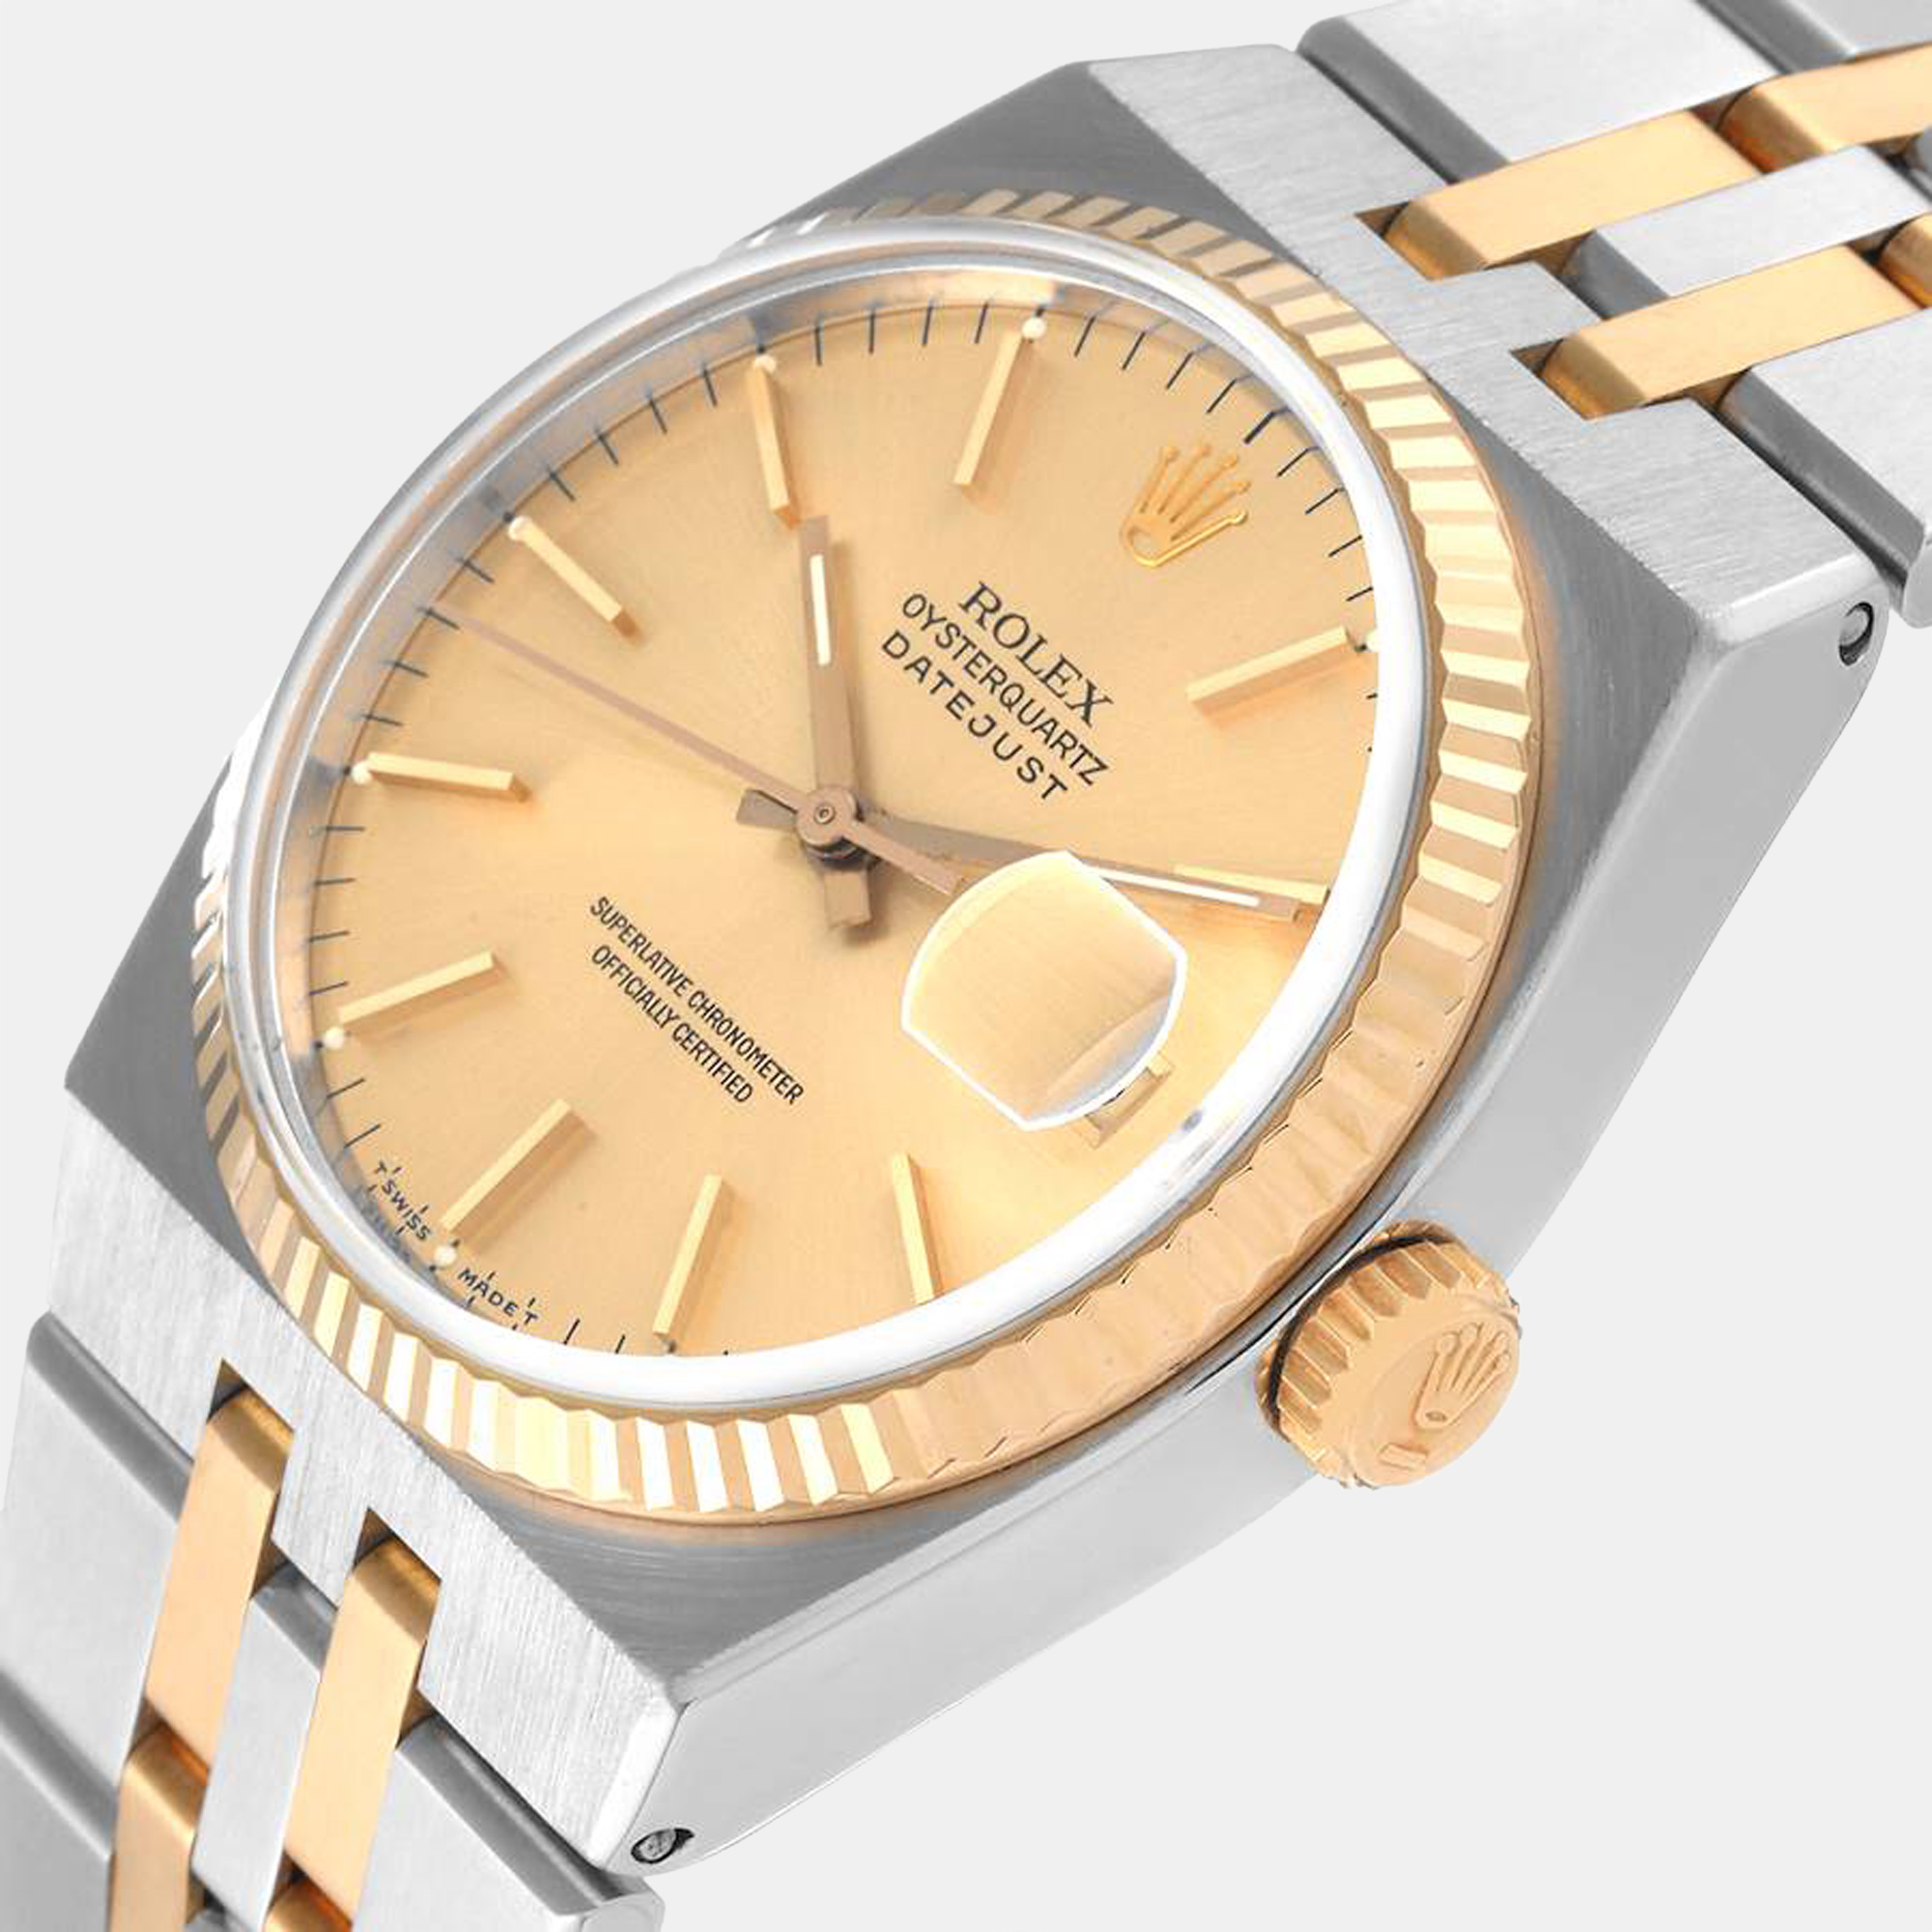 

Rolex Champagne 18k Yellow Gold And Stainless Steel Datejust Oysterquartz 17013 Automatic Men's Wristwatch 36 mm